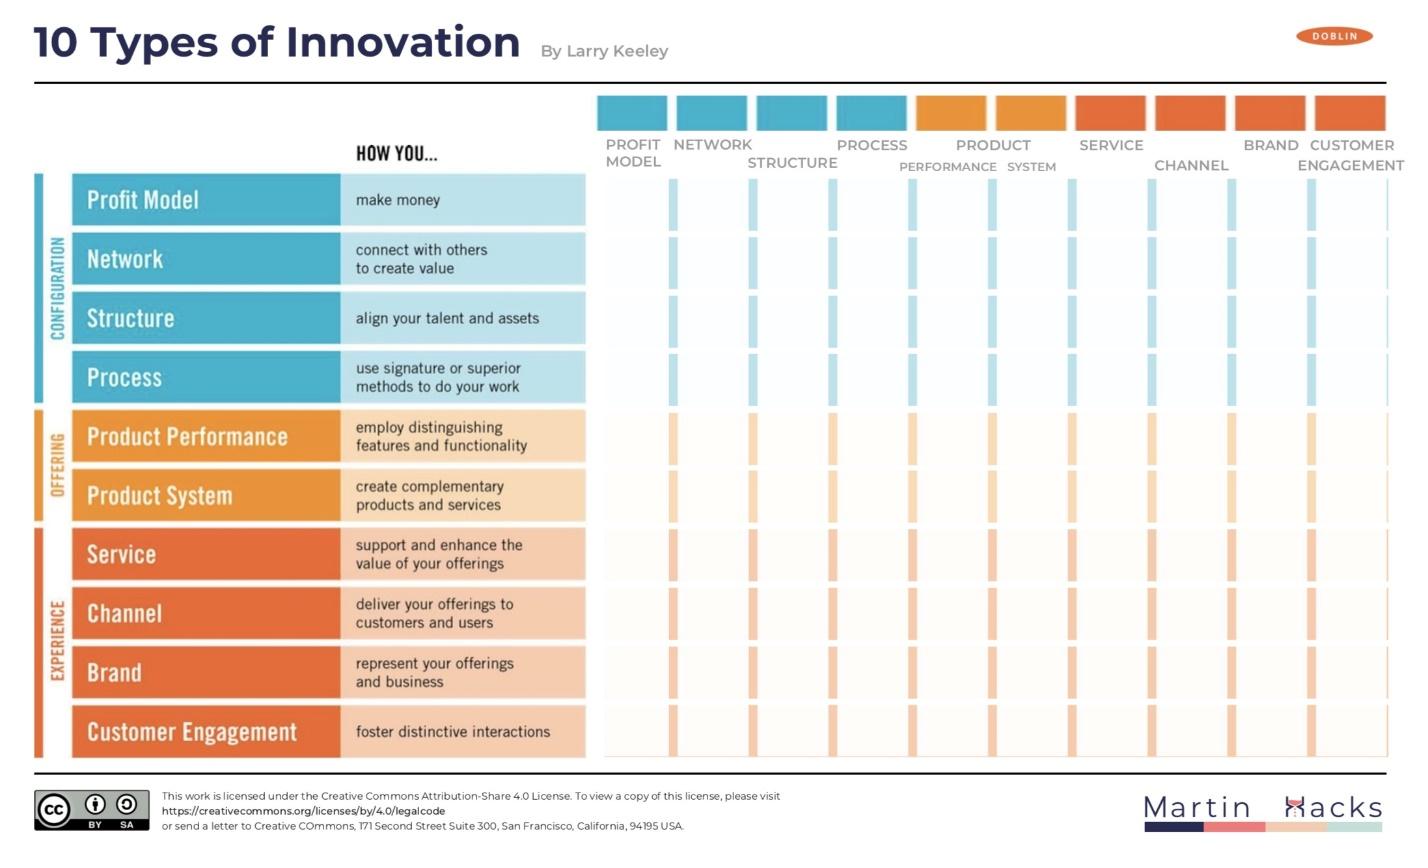 The ten types of innovation